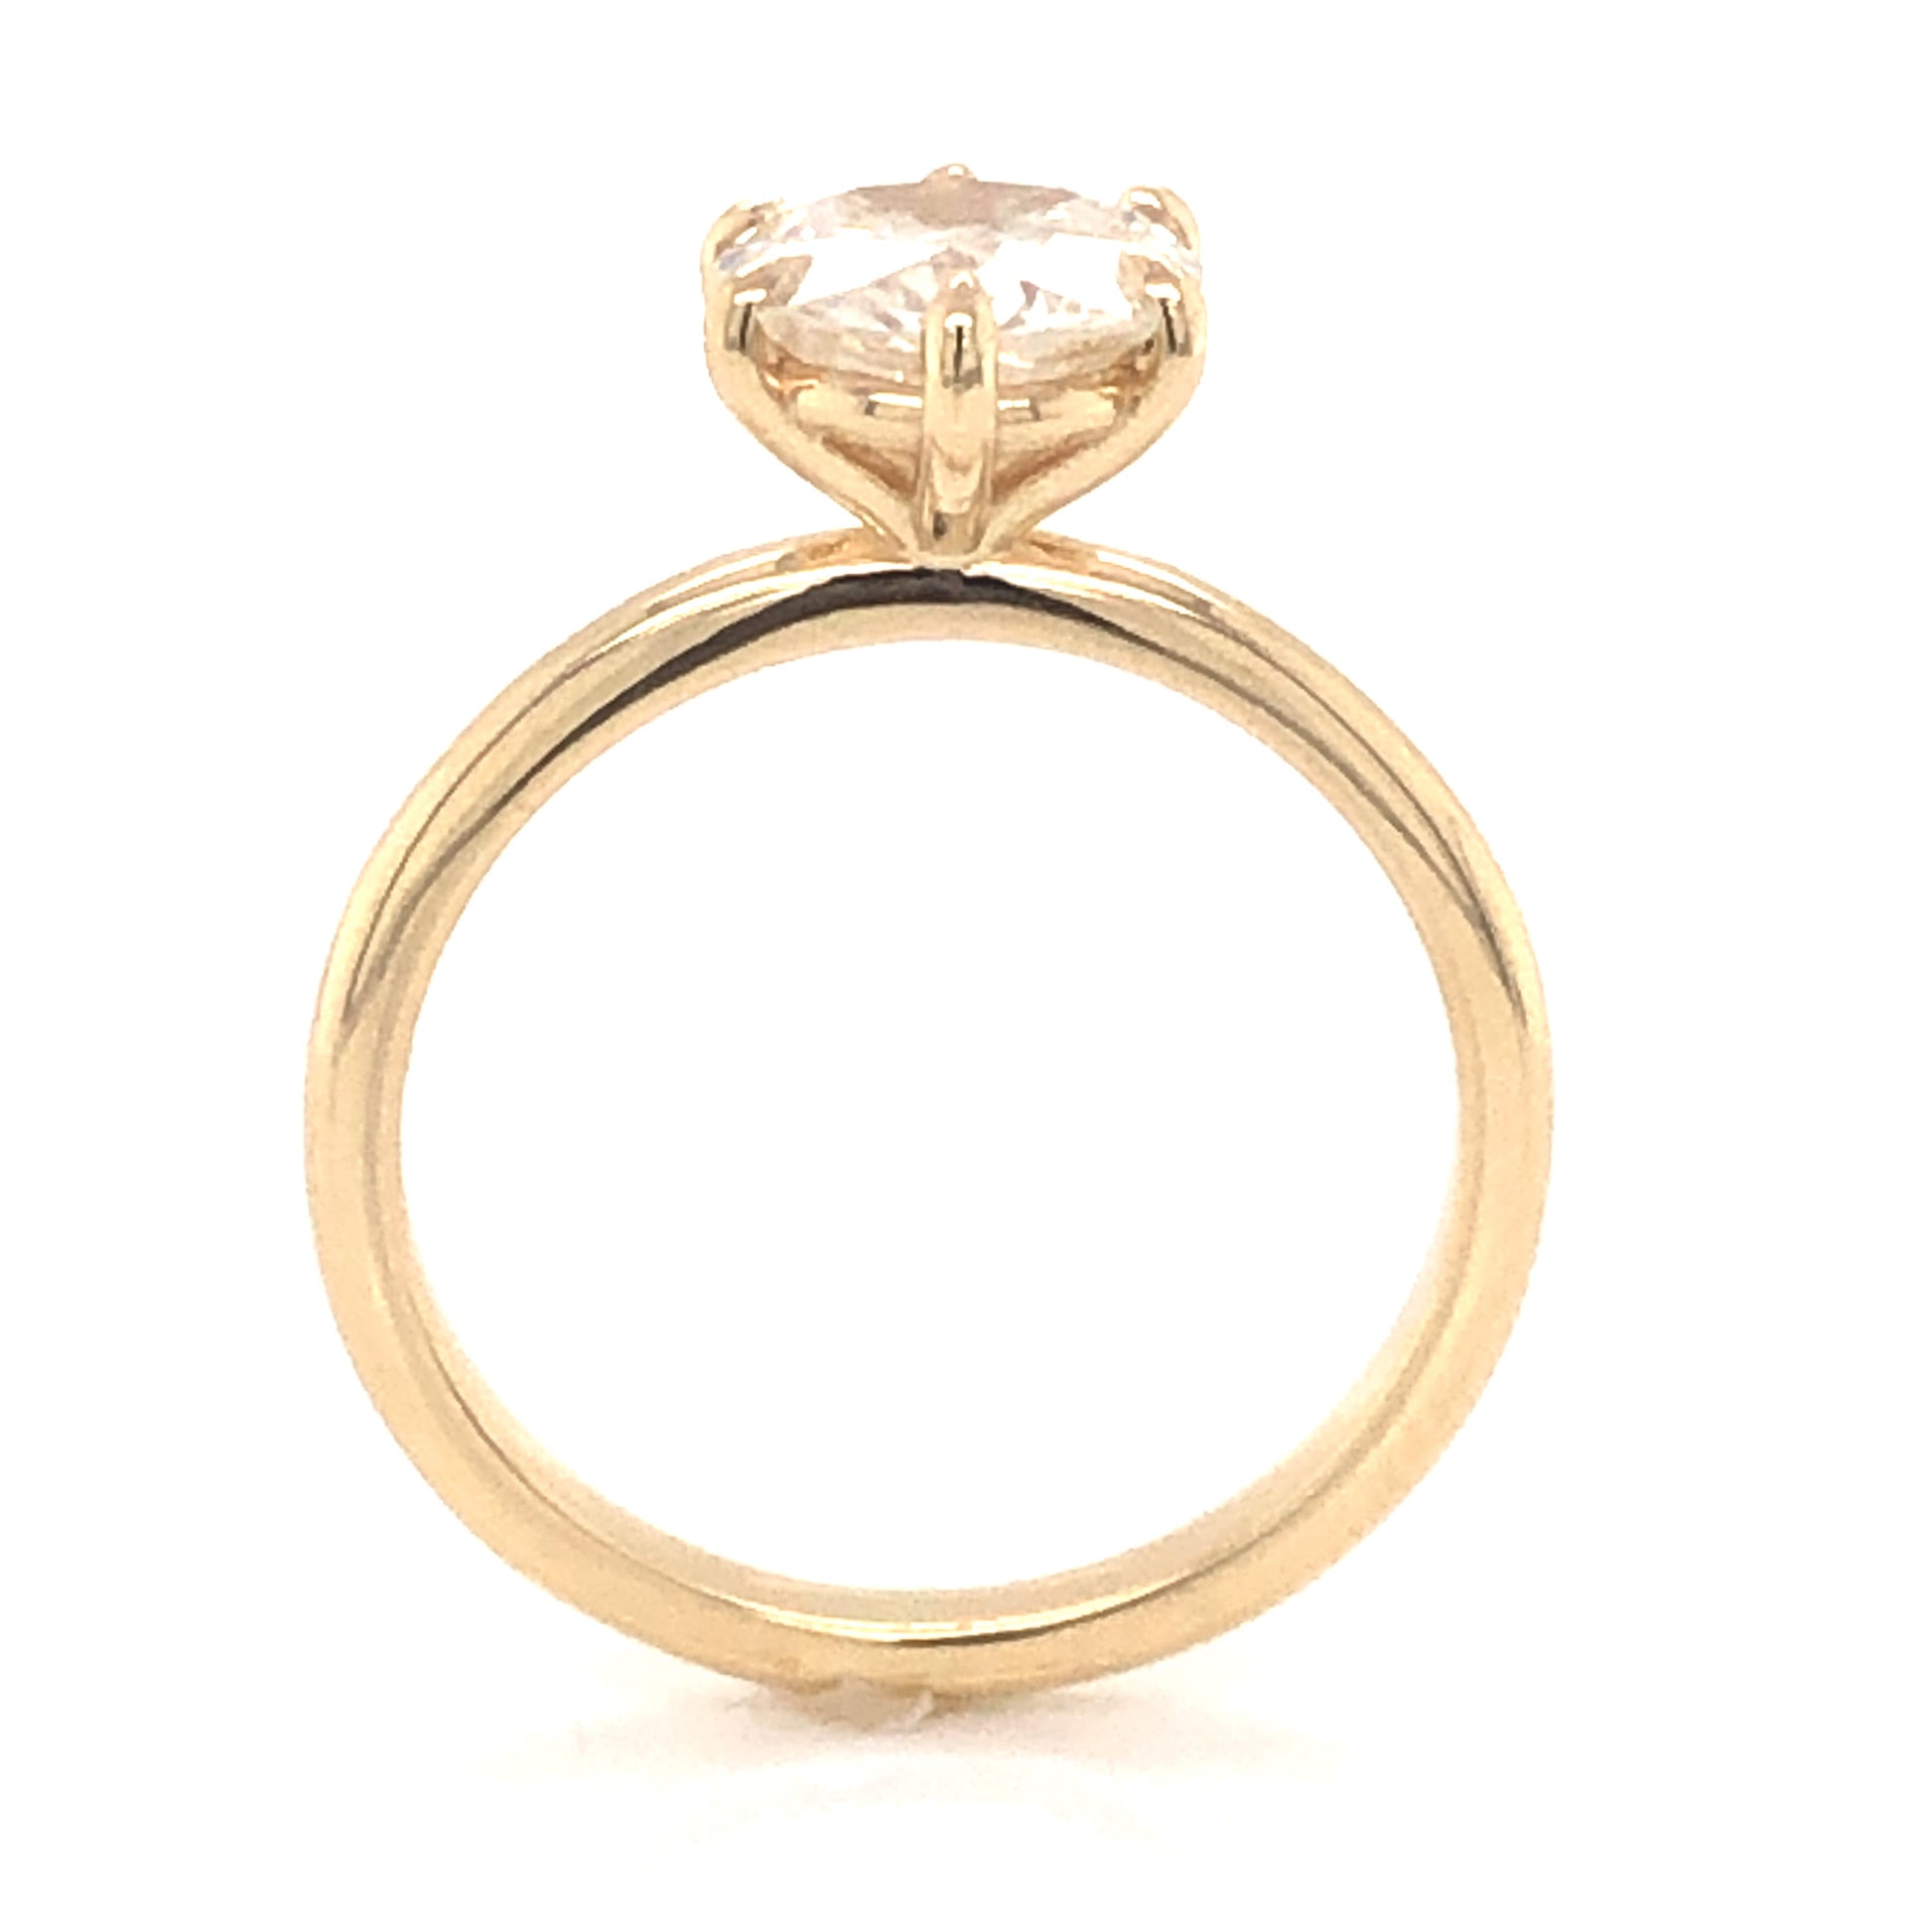 1.44 Solitaire Diamond Engagement Ring in 14K Yellow Gold